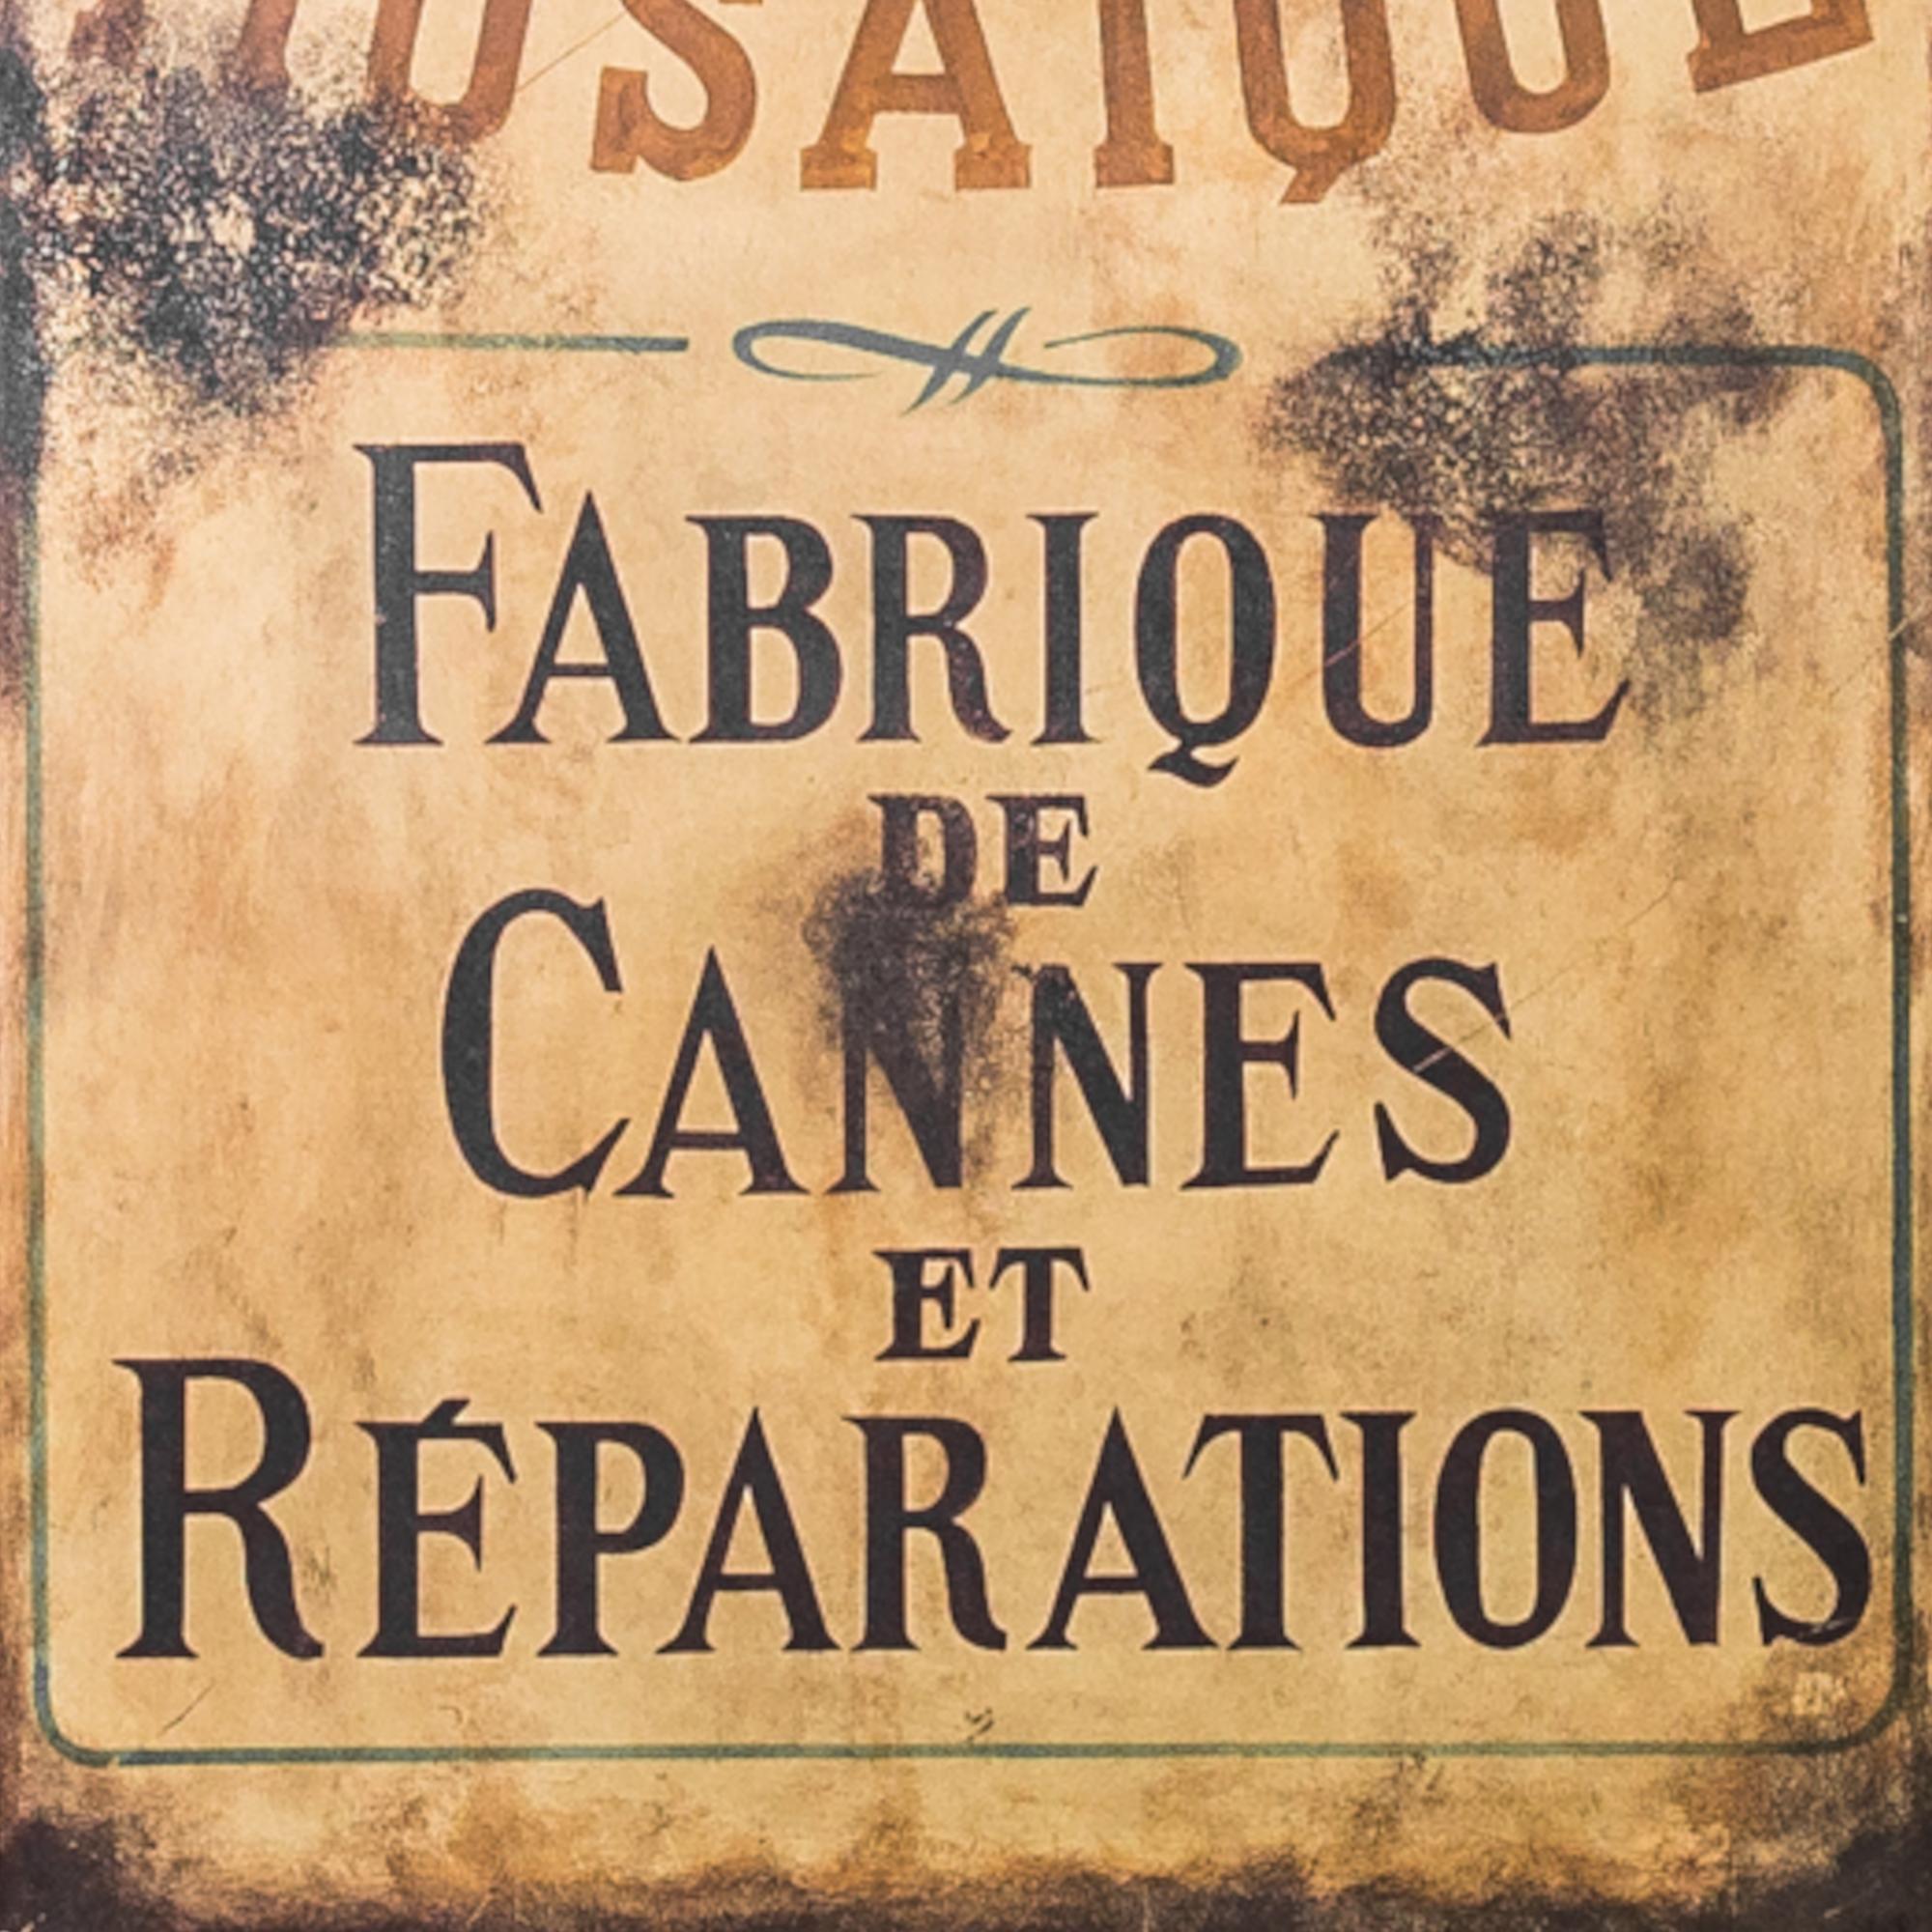 A nostalgic hand painted metal sign made in France, circa 1920. The sign advertises Mr Stiffa’s Canes Factory, a little shop where the attentive craftsman would repair or manufacture the perfect walking cane out of olive wood. A delightful